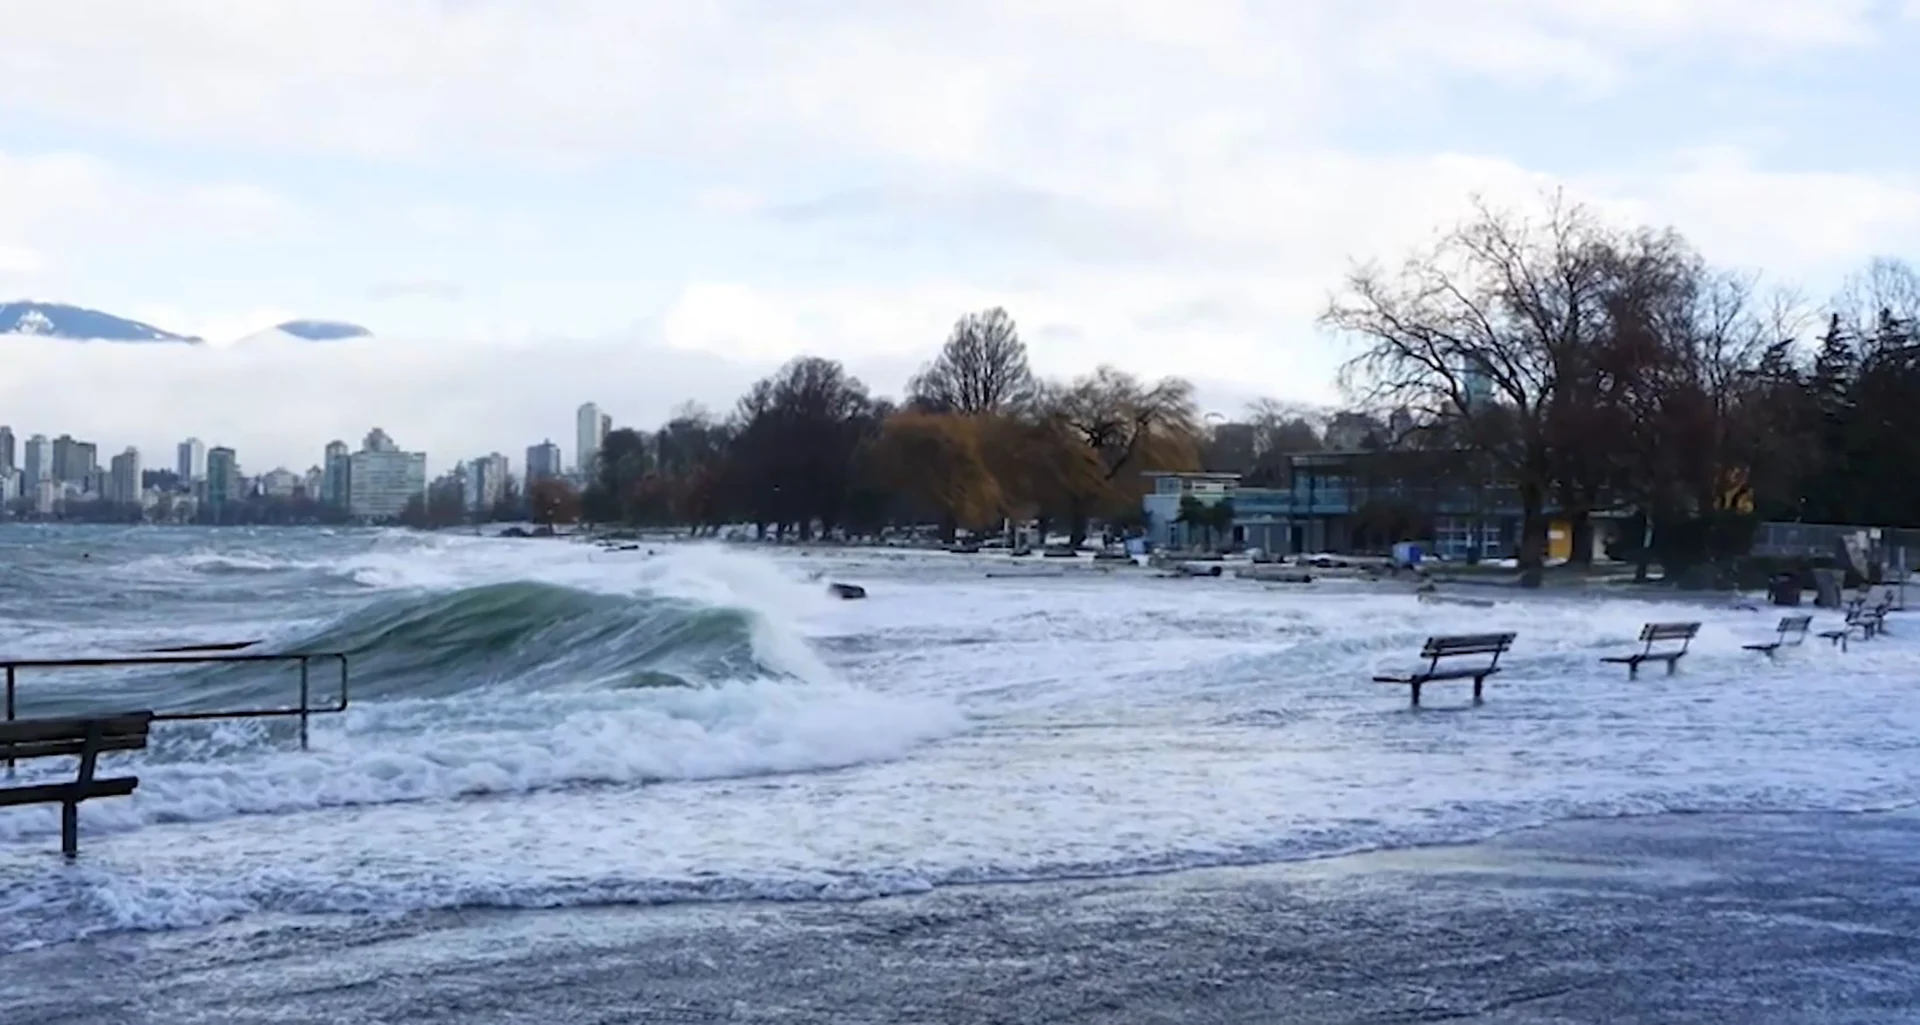 The fight to save Vancouver’s disappearing beaches